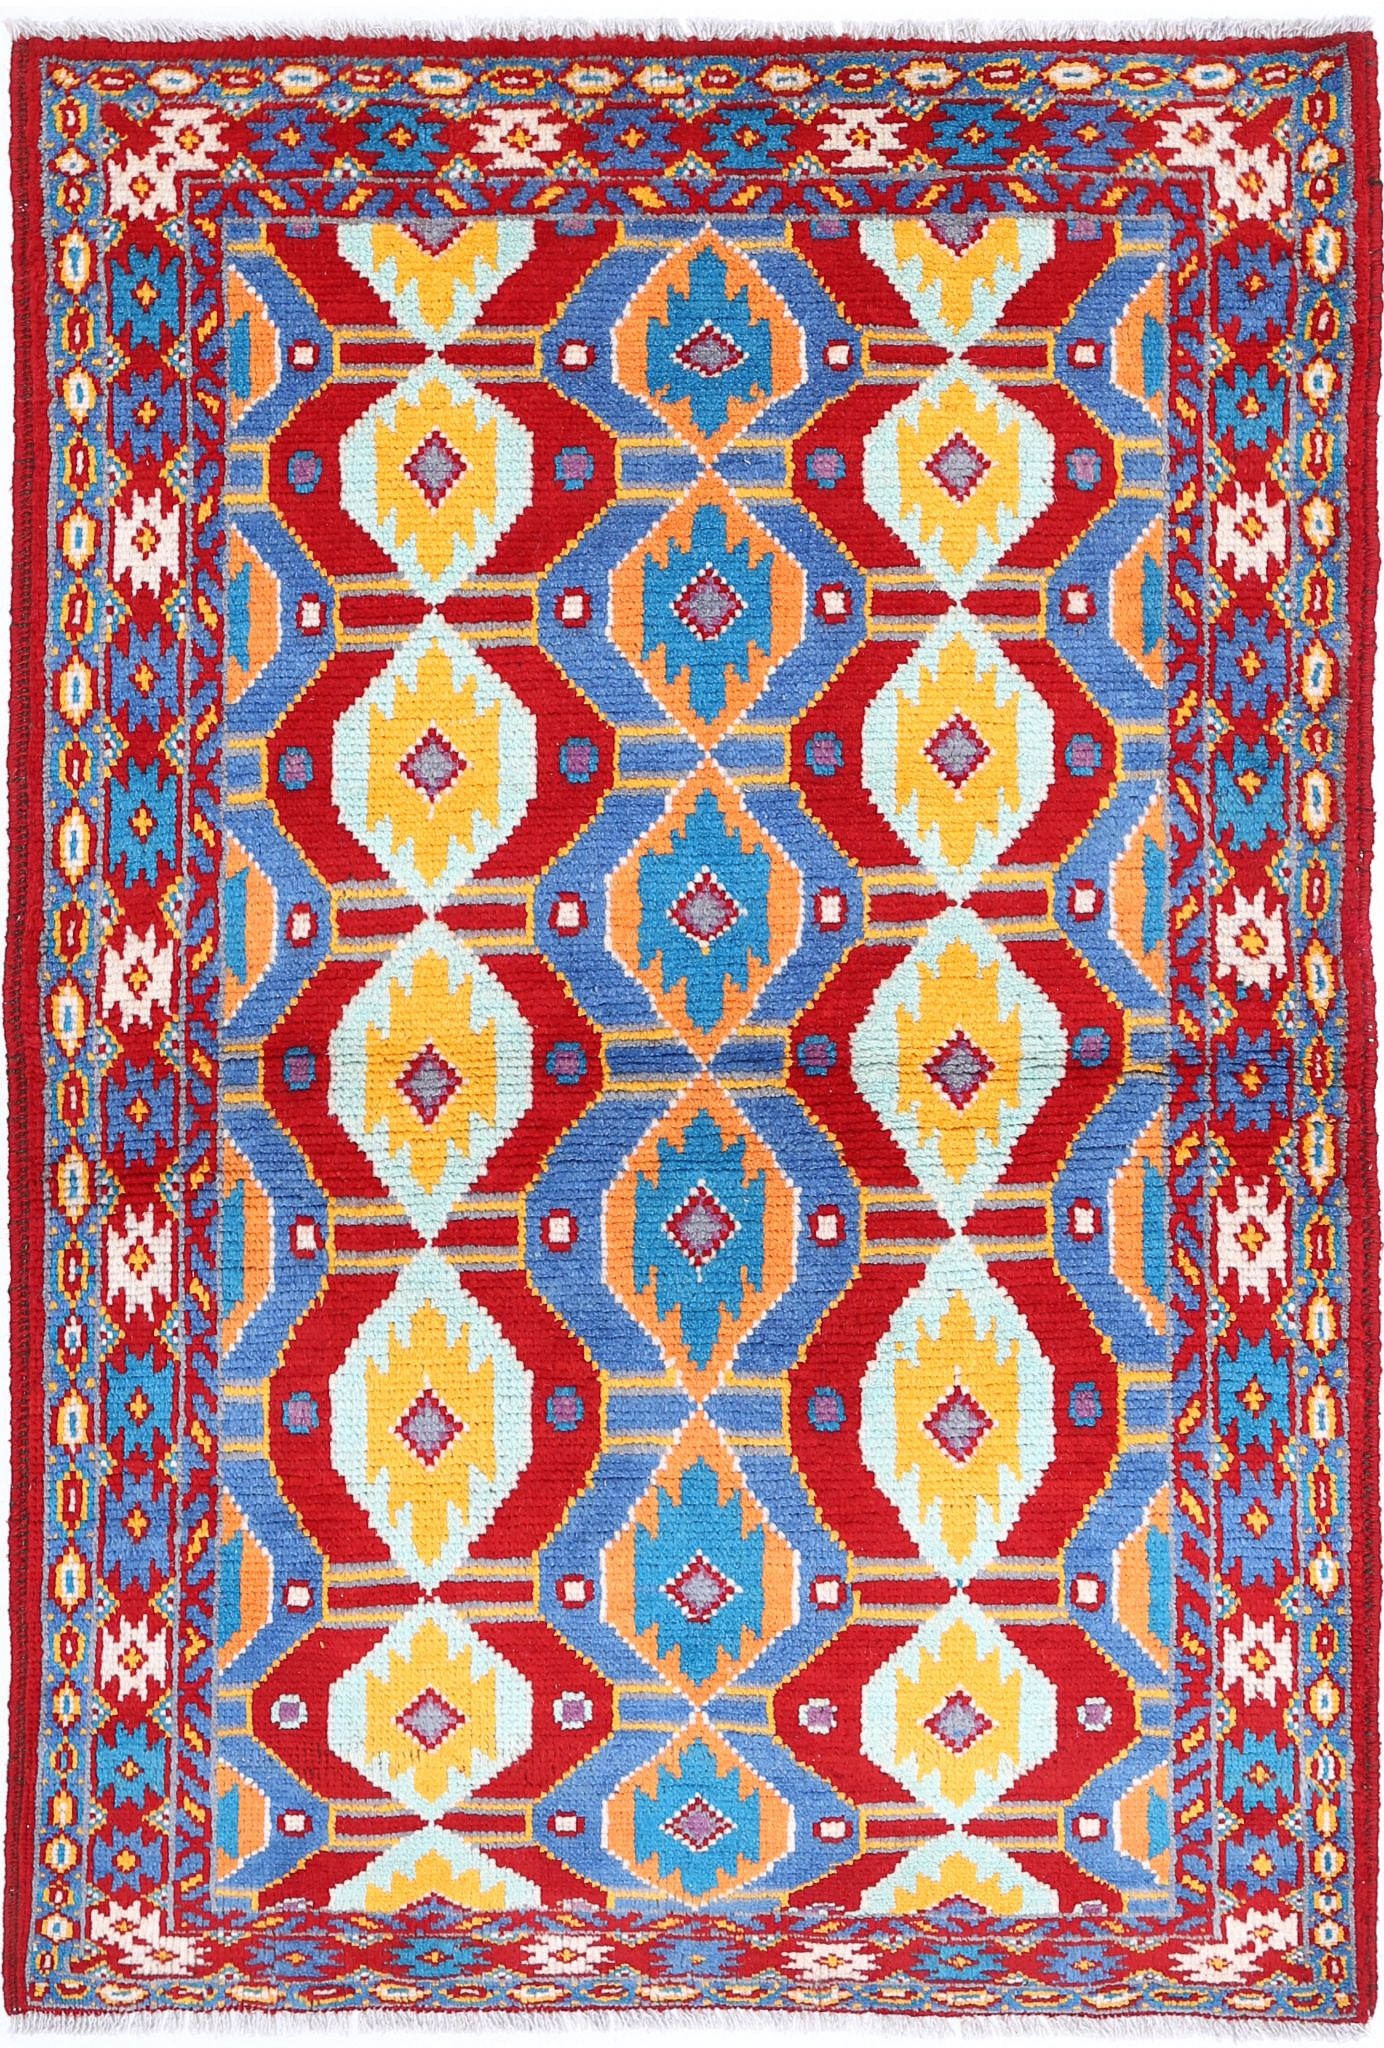 Revival-hand-knotted-qarghani-wool-rug-5014202.jpg